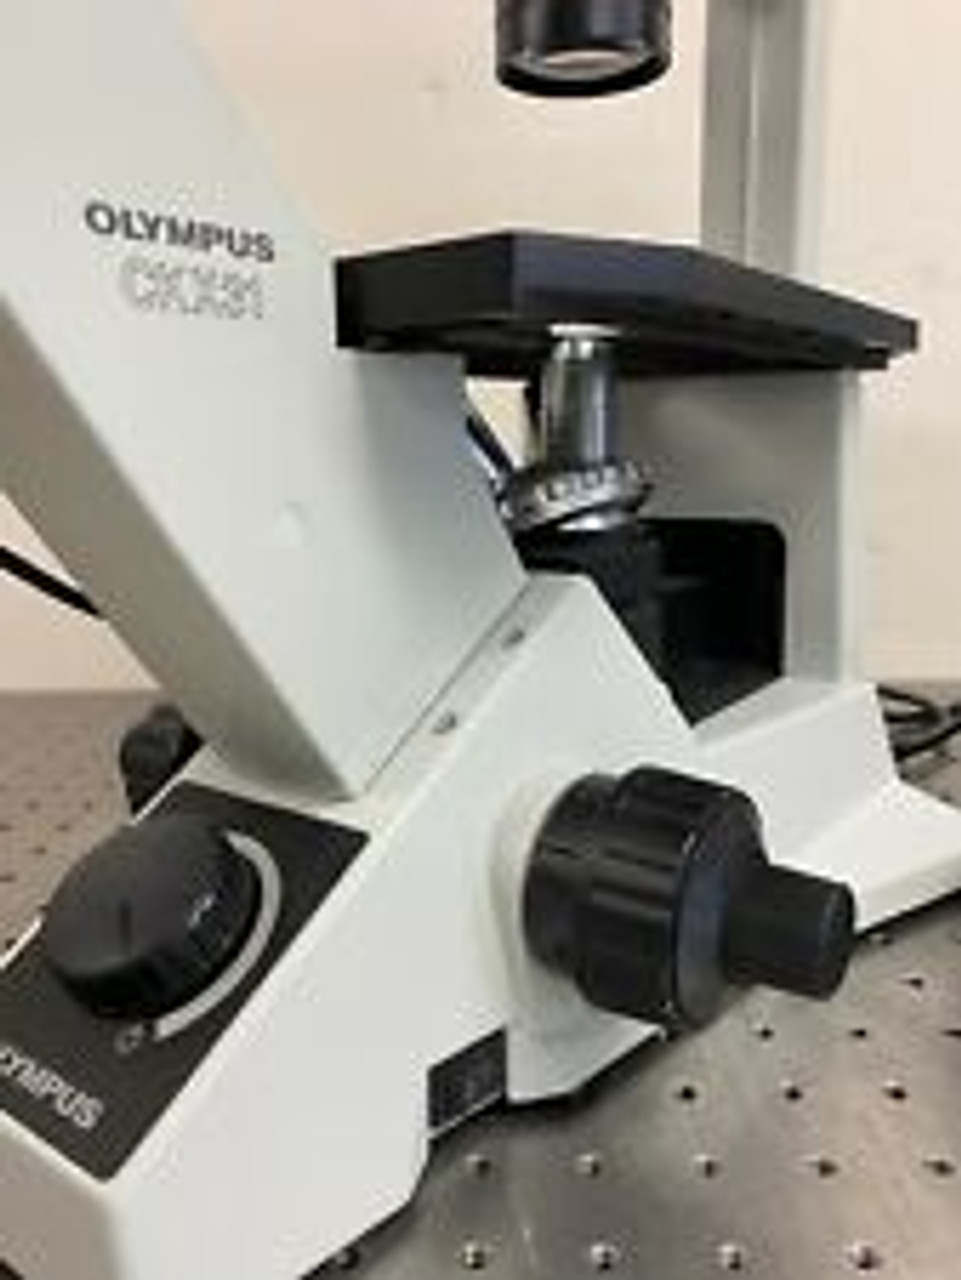 Olympus CKX31 Inverted Phase Contrast Microscope